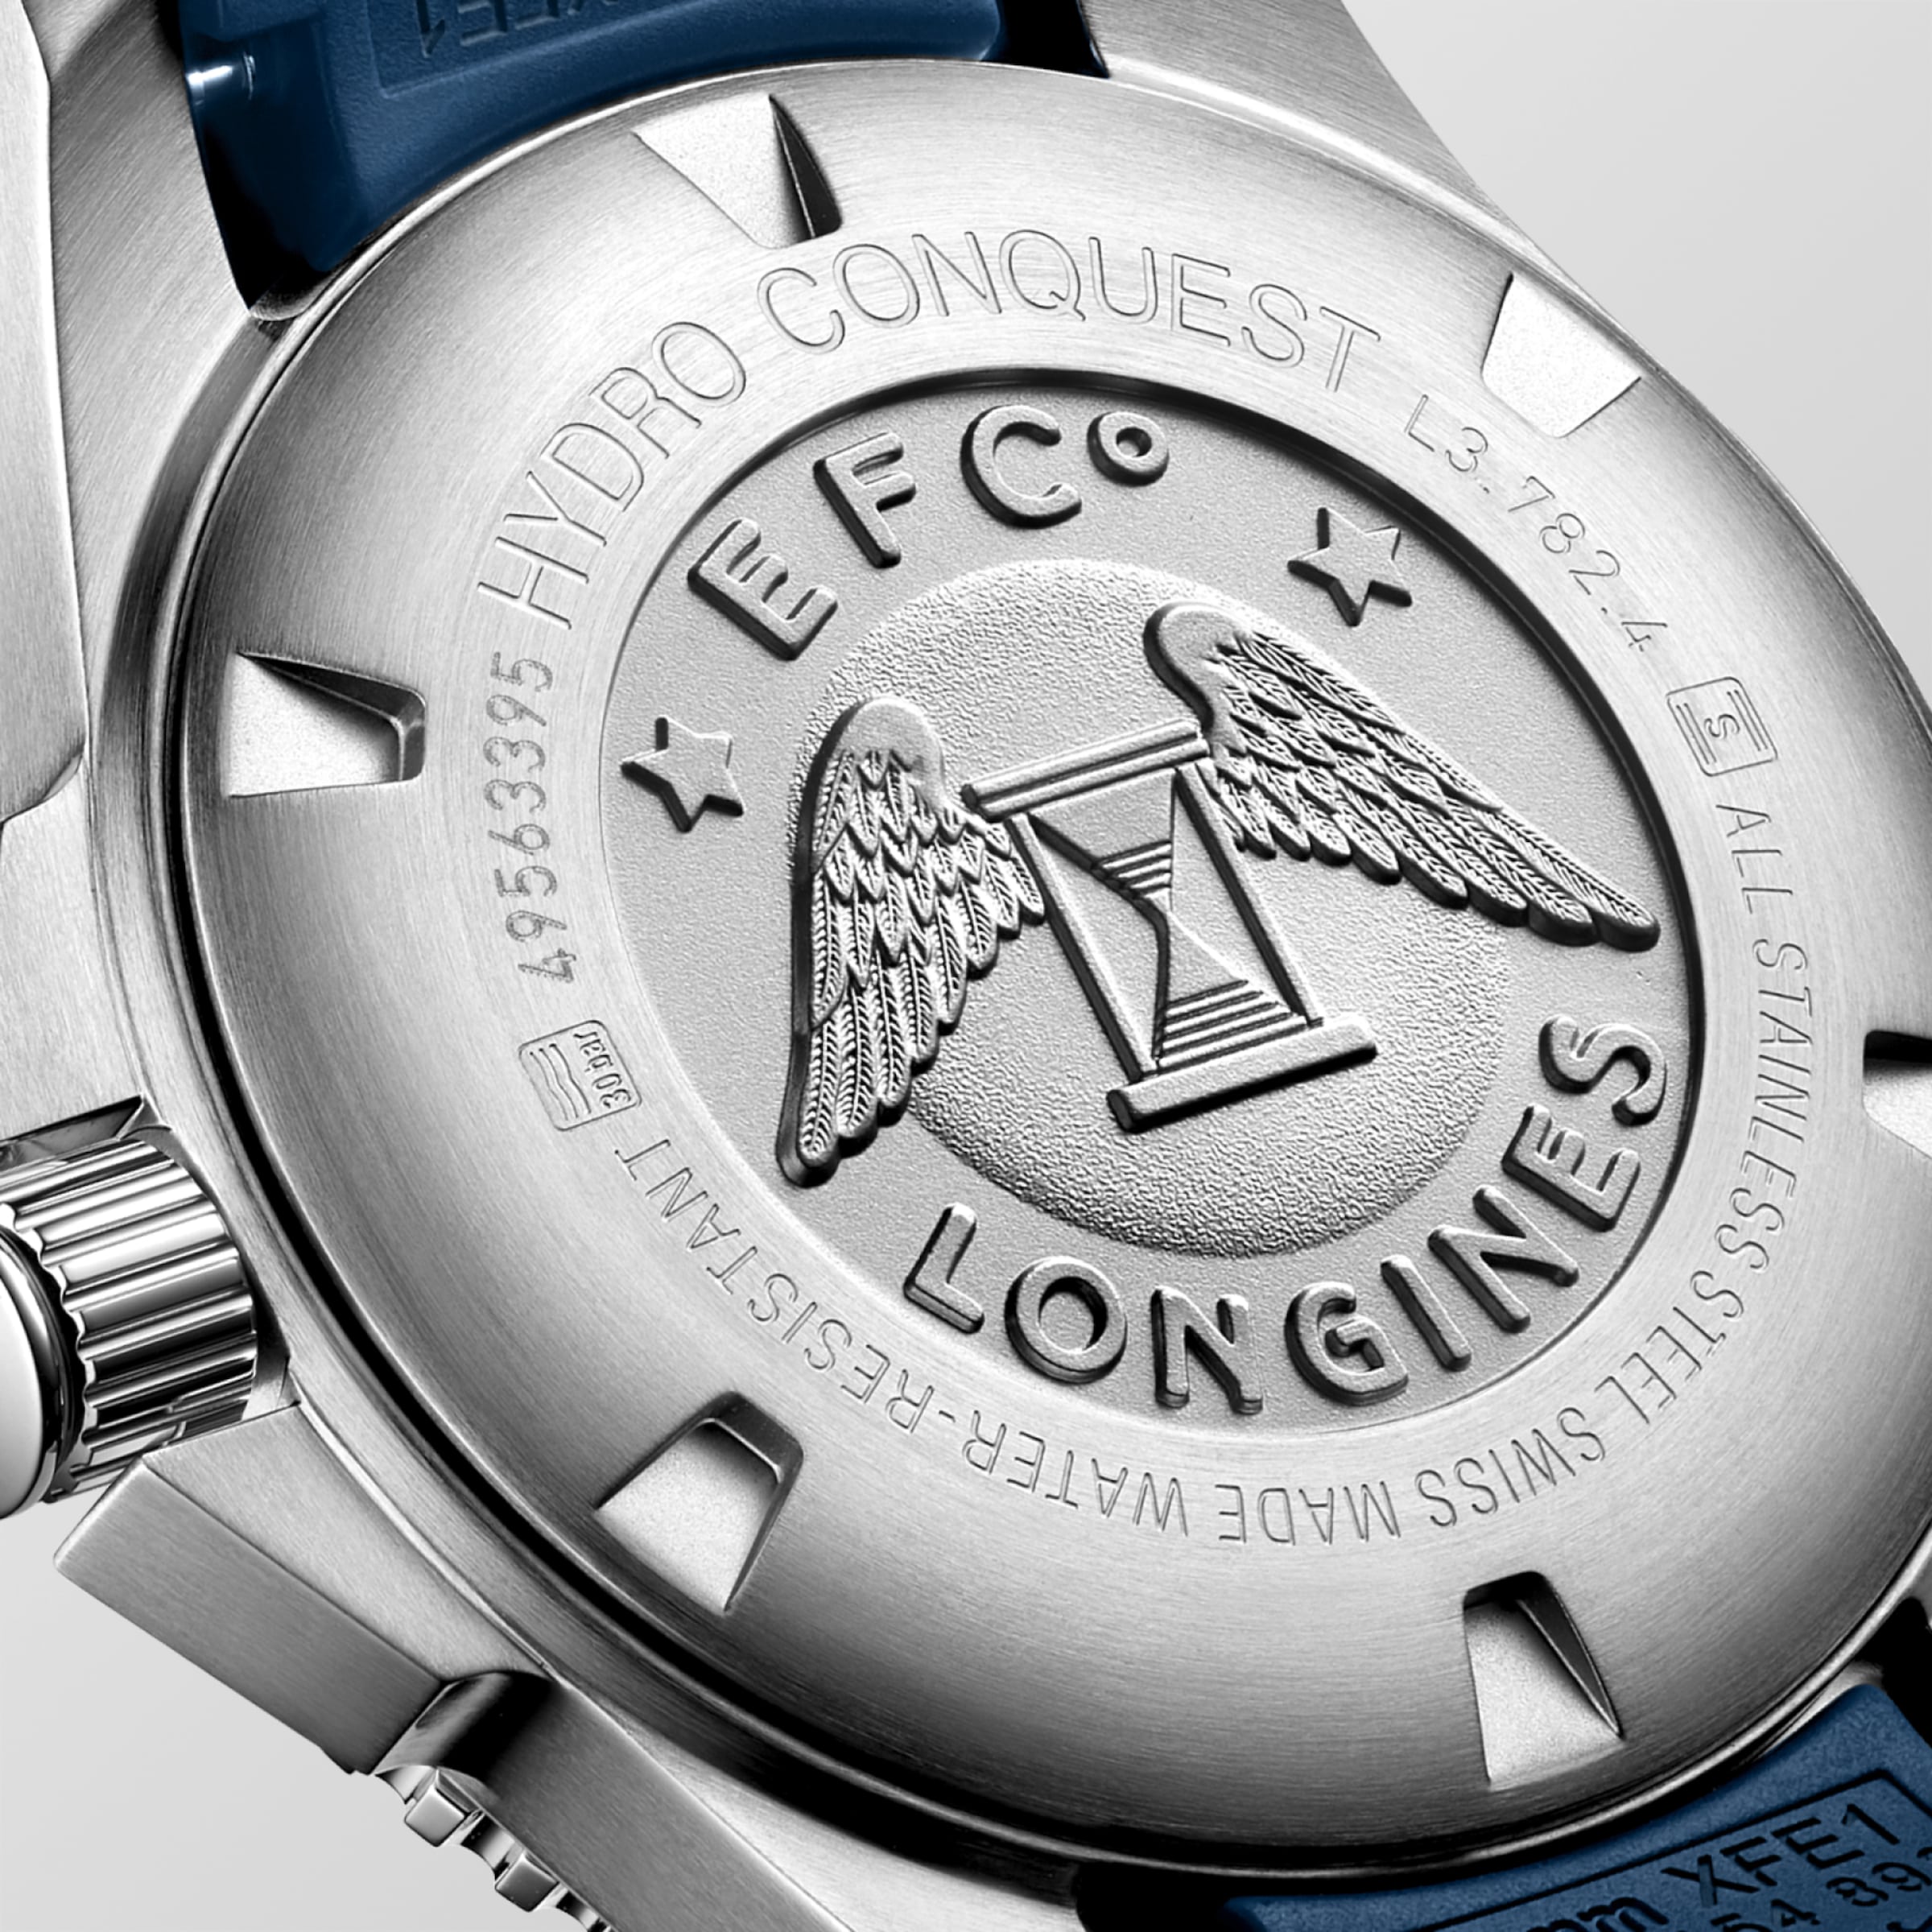 Longines HYDROCONQUEST Automatic Stainless steel and ceramic bezel Watch - L3.782.4.96.9